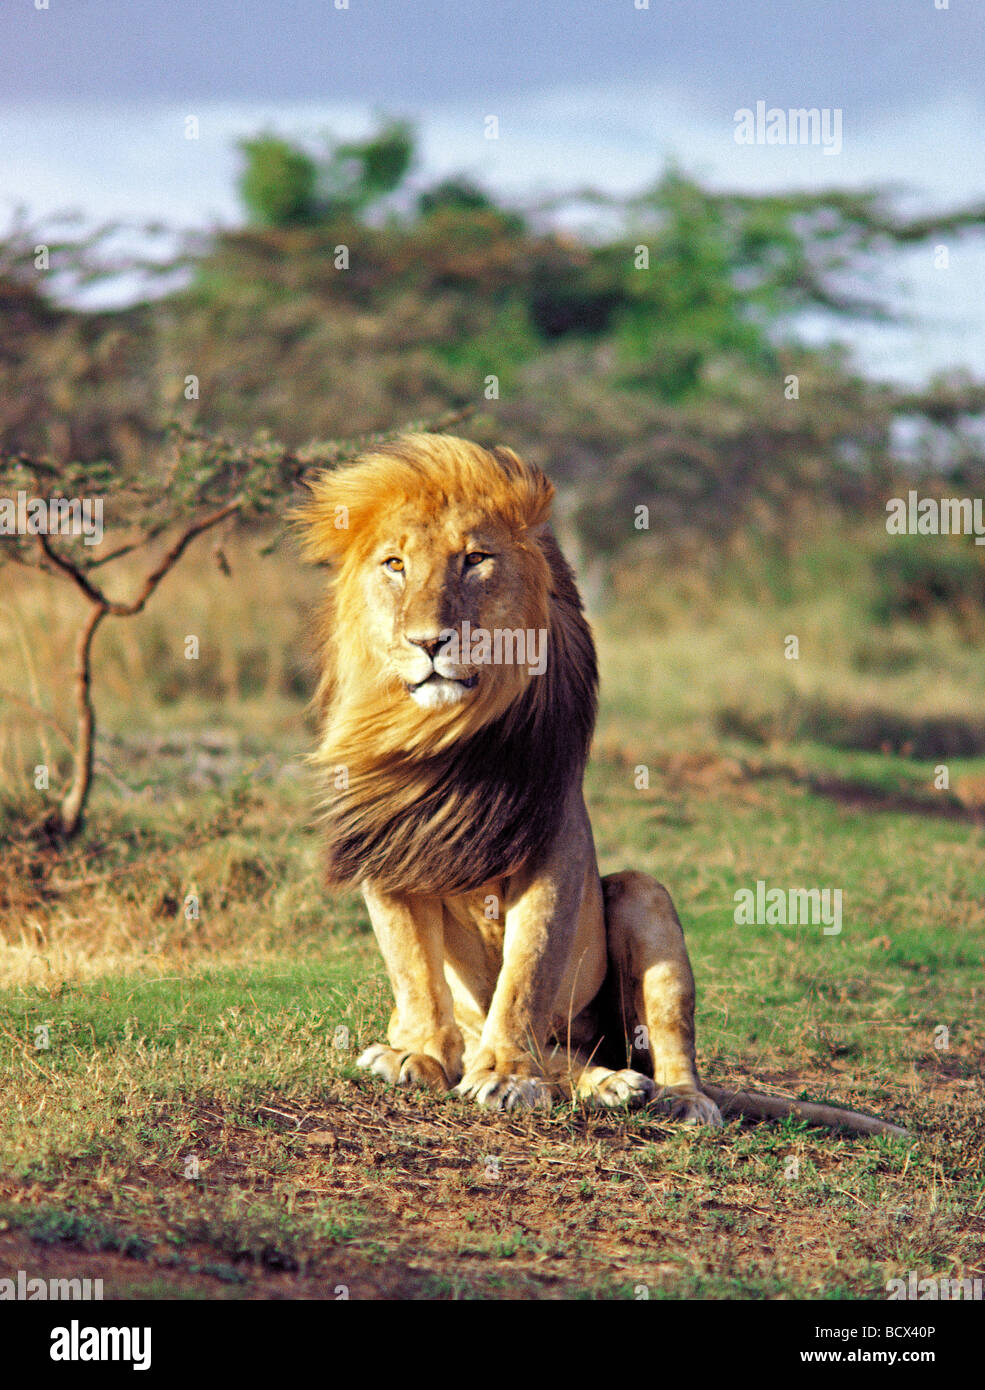 Male Lion with exceptionally fine long mane being blown in wind Soloi Ranch Kenya East Africa Stock Photo